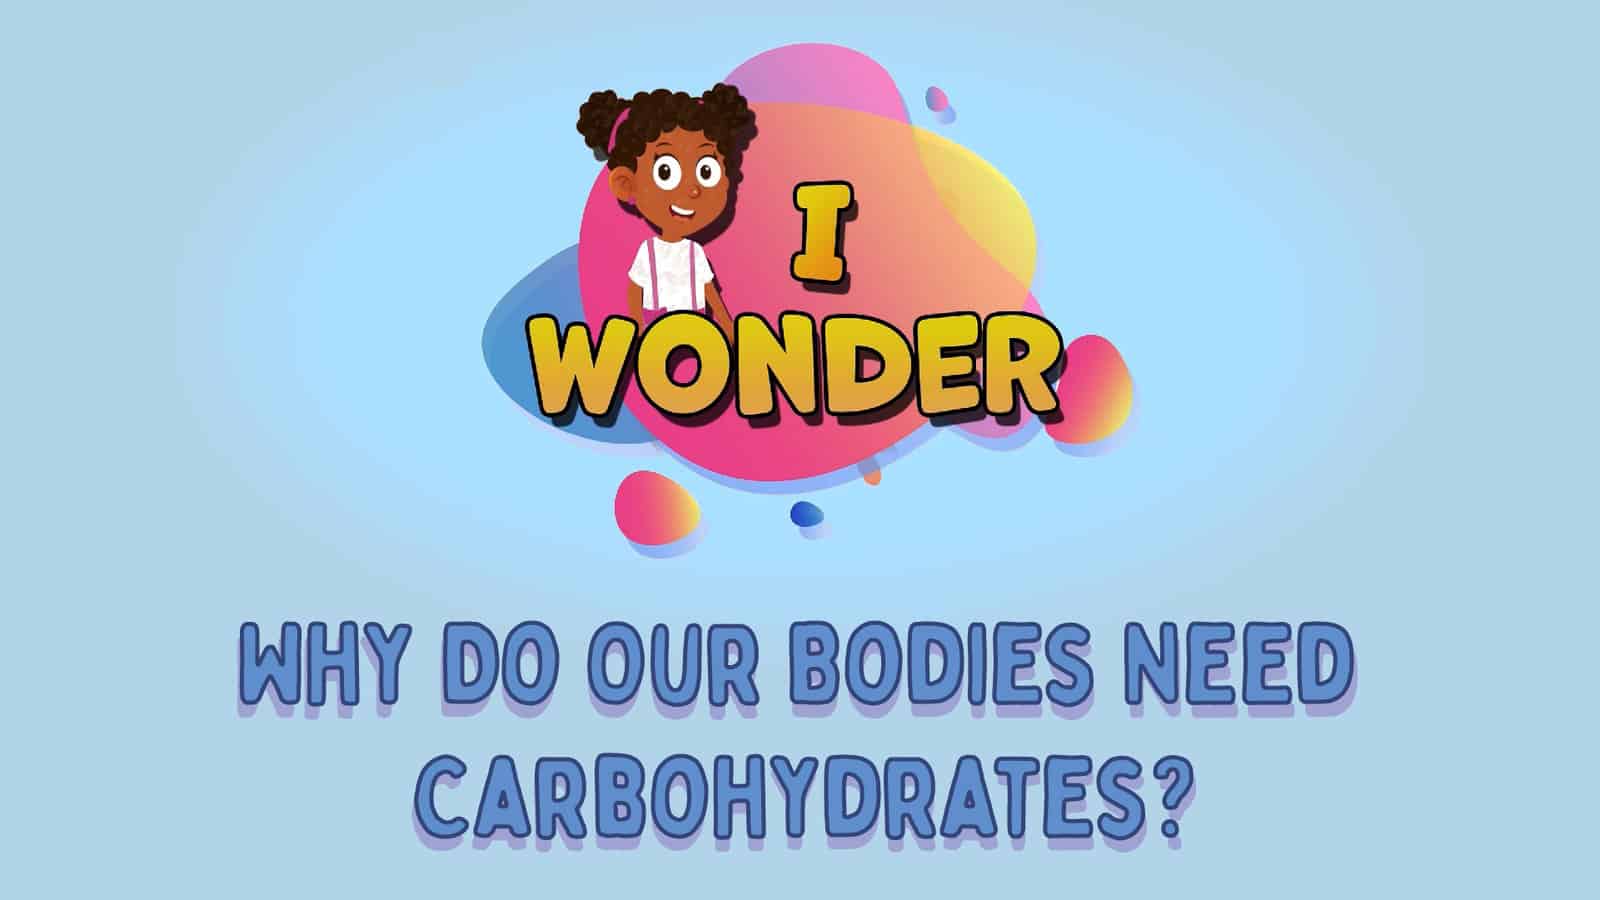 Why Do Our Bodies Need Carbohydrates?